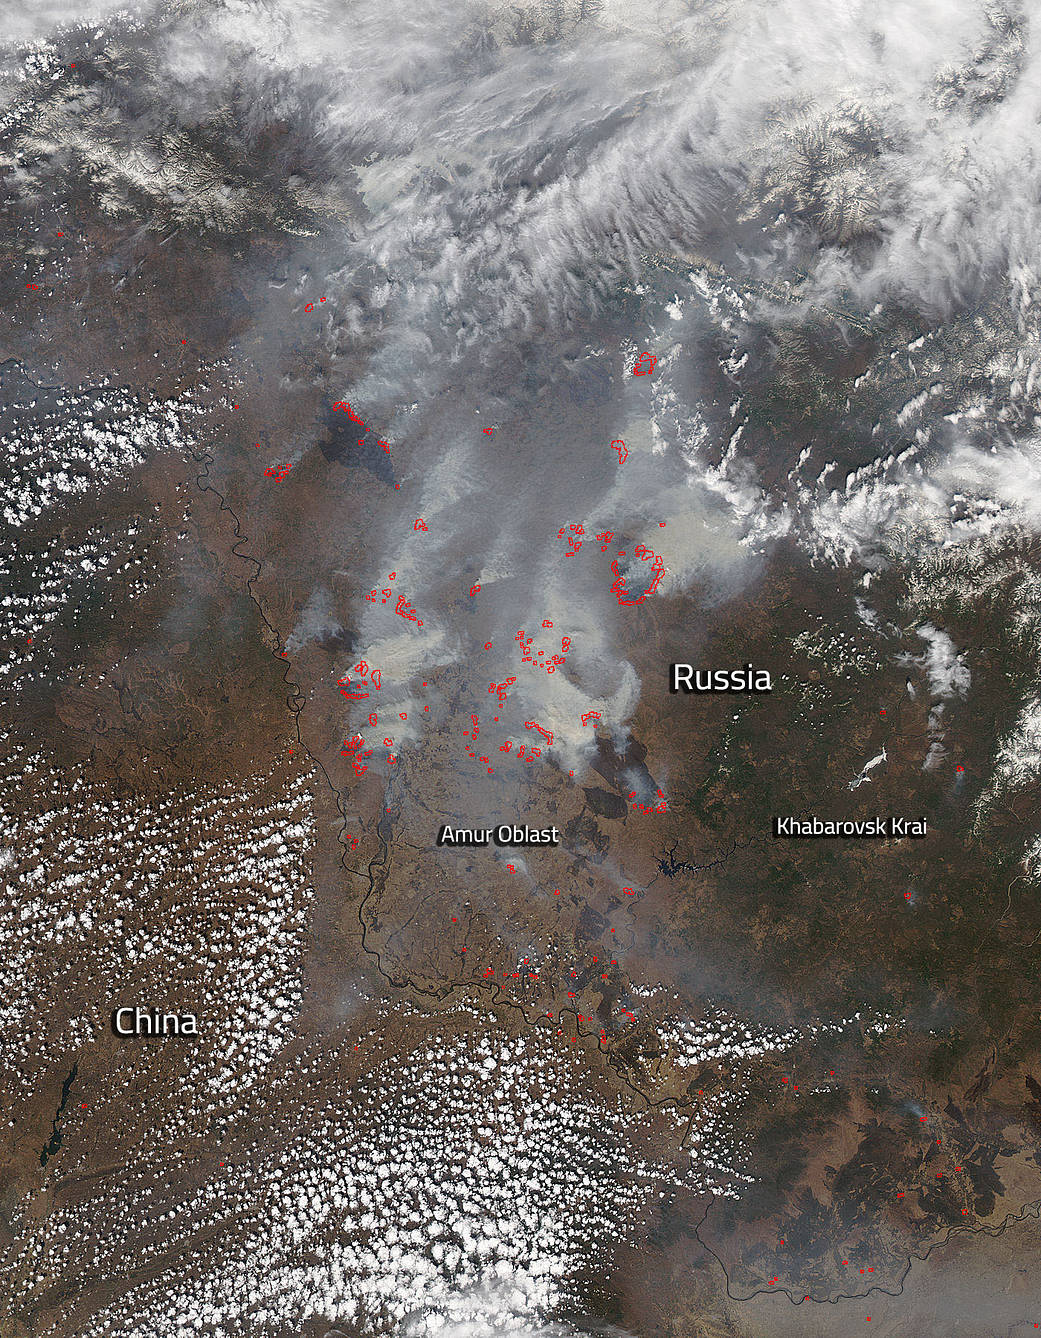 Fires and smoke in Russia